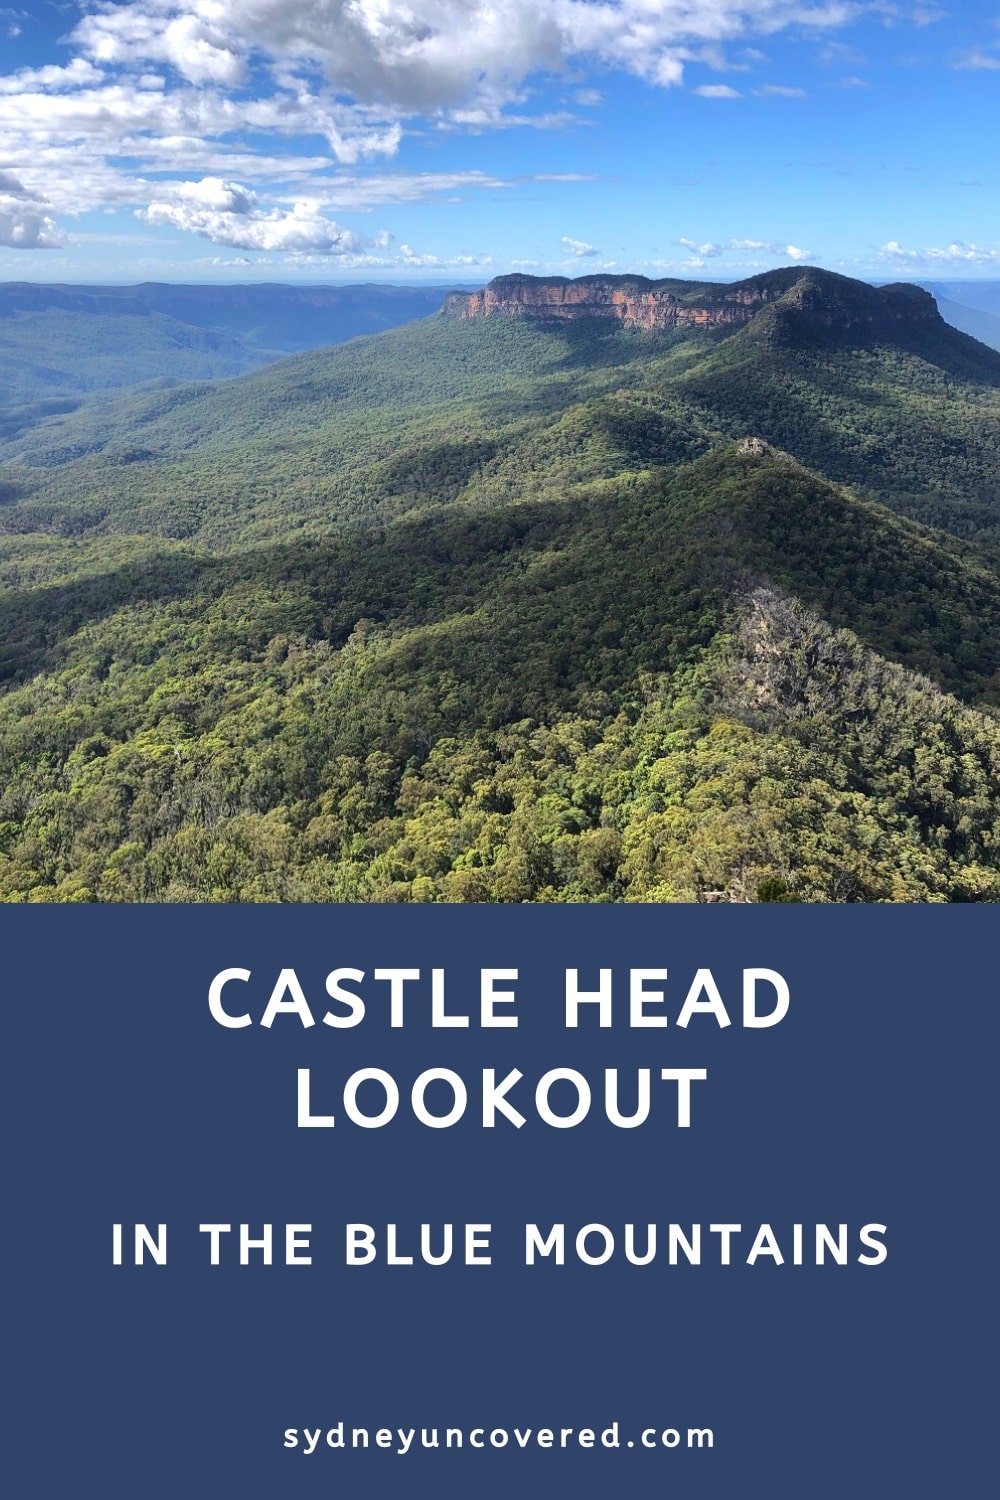 Castle Head Lookout in the Blue Mountains